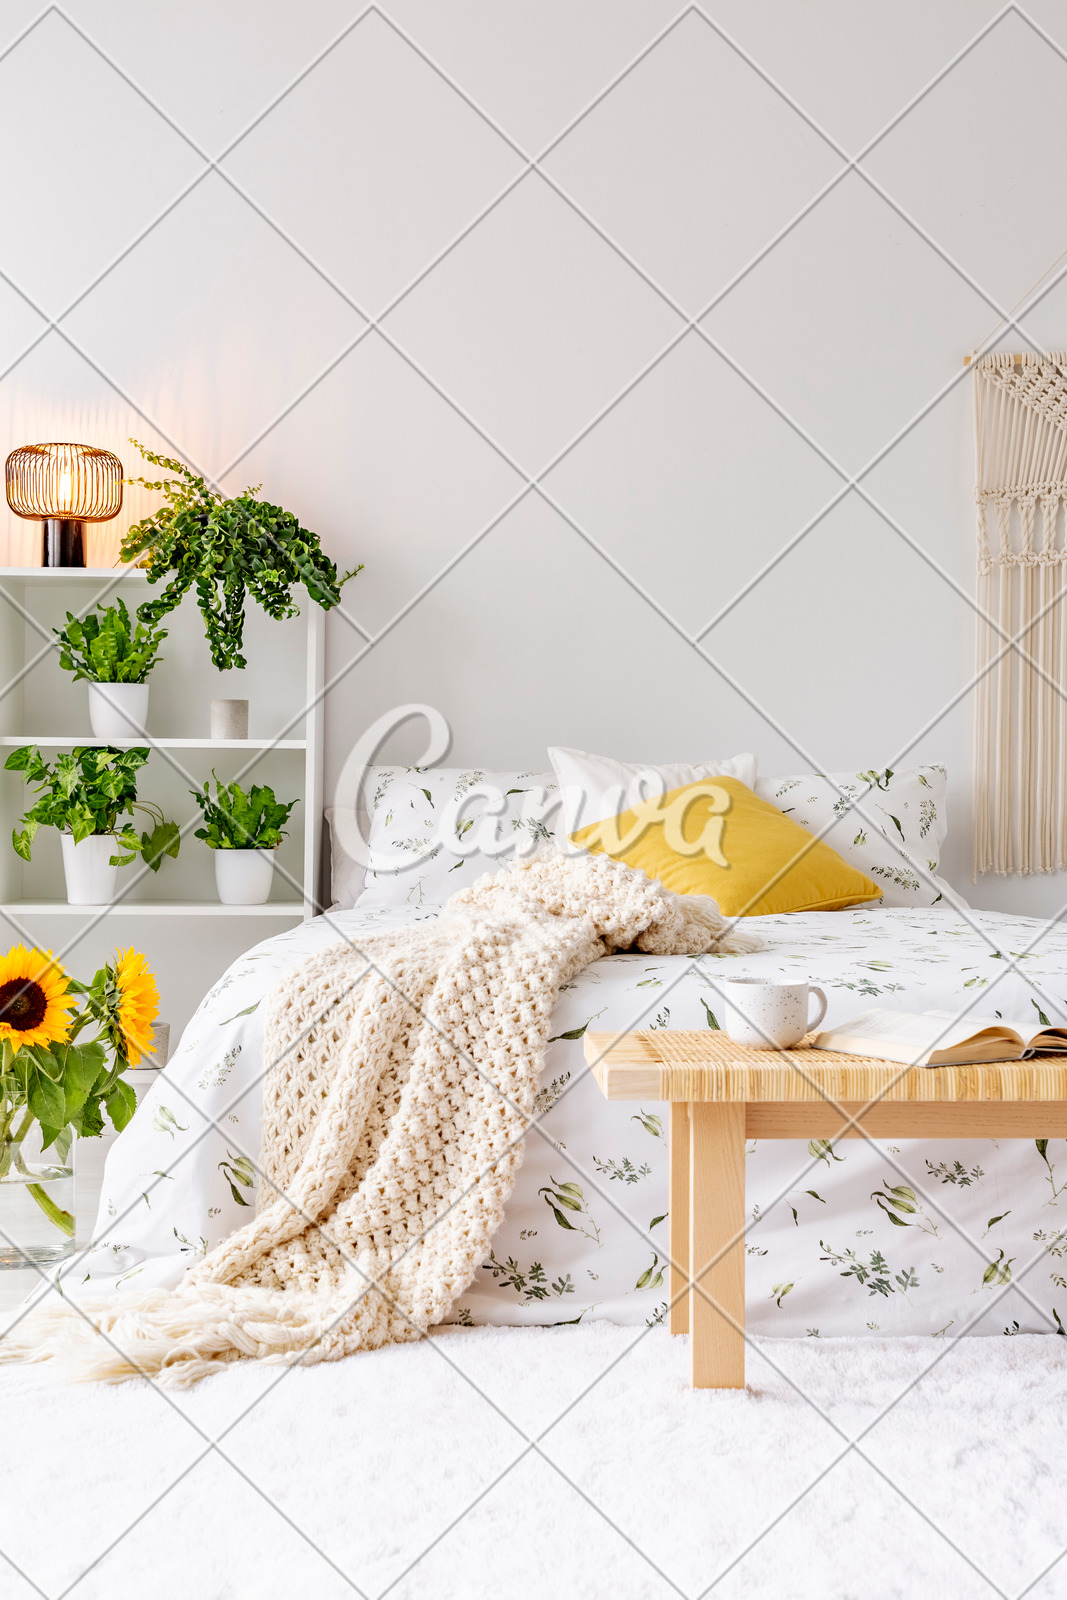 Sunny Spring Bedroom Interior With Green Plants Beside A Bed